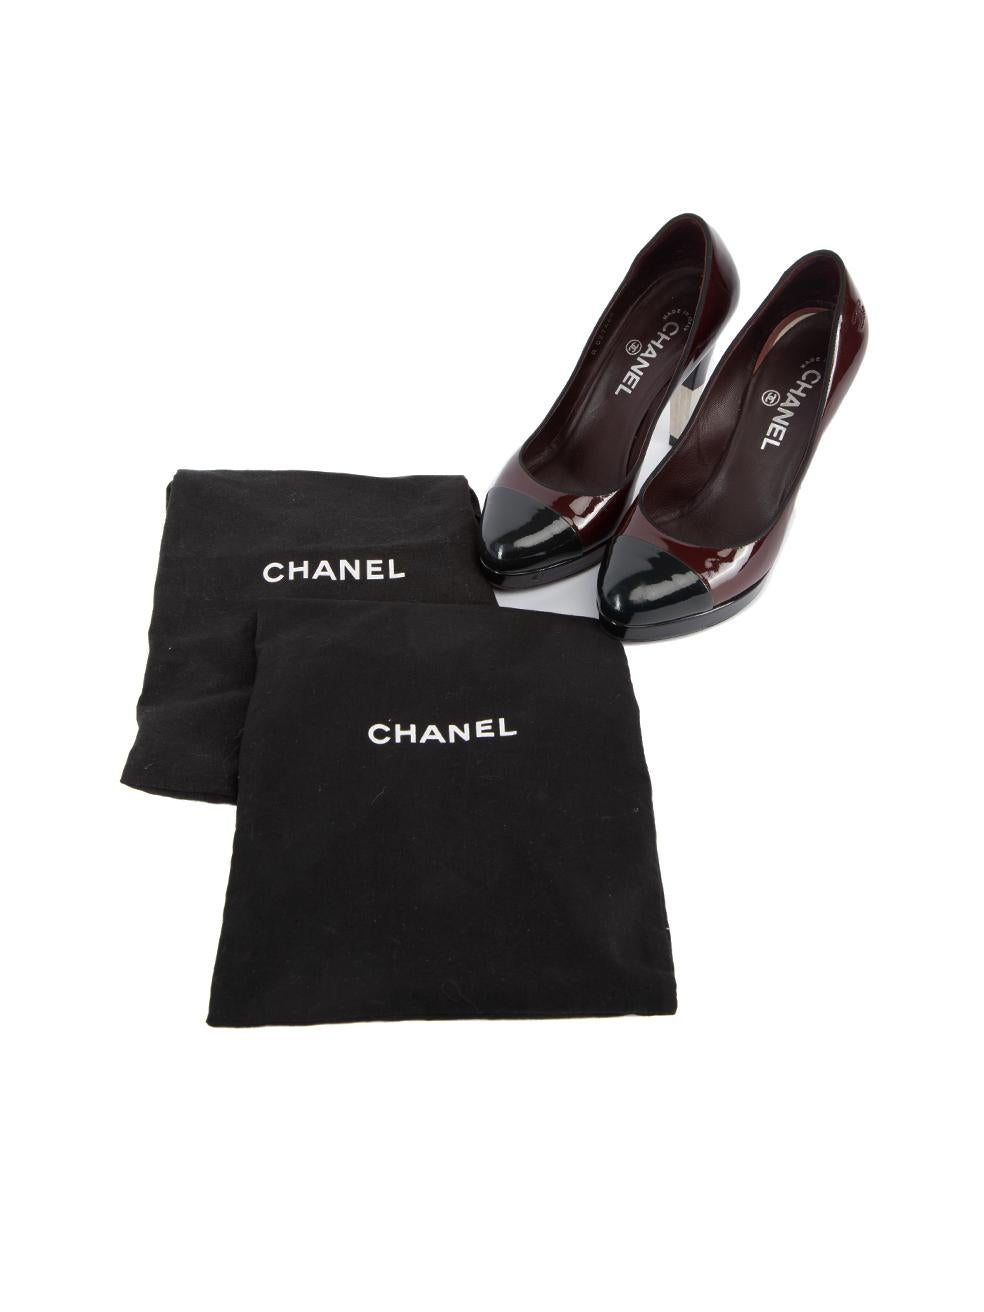 Chanel Women's Burgundy Patent Leather Metal Accent Heel For Sale 2